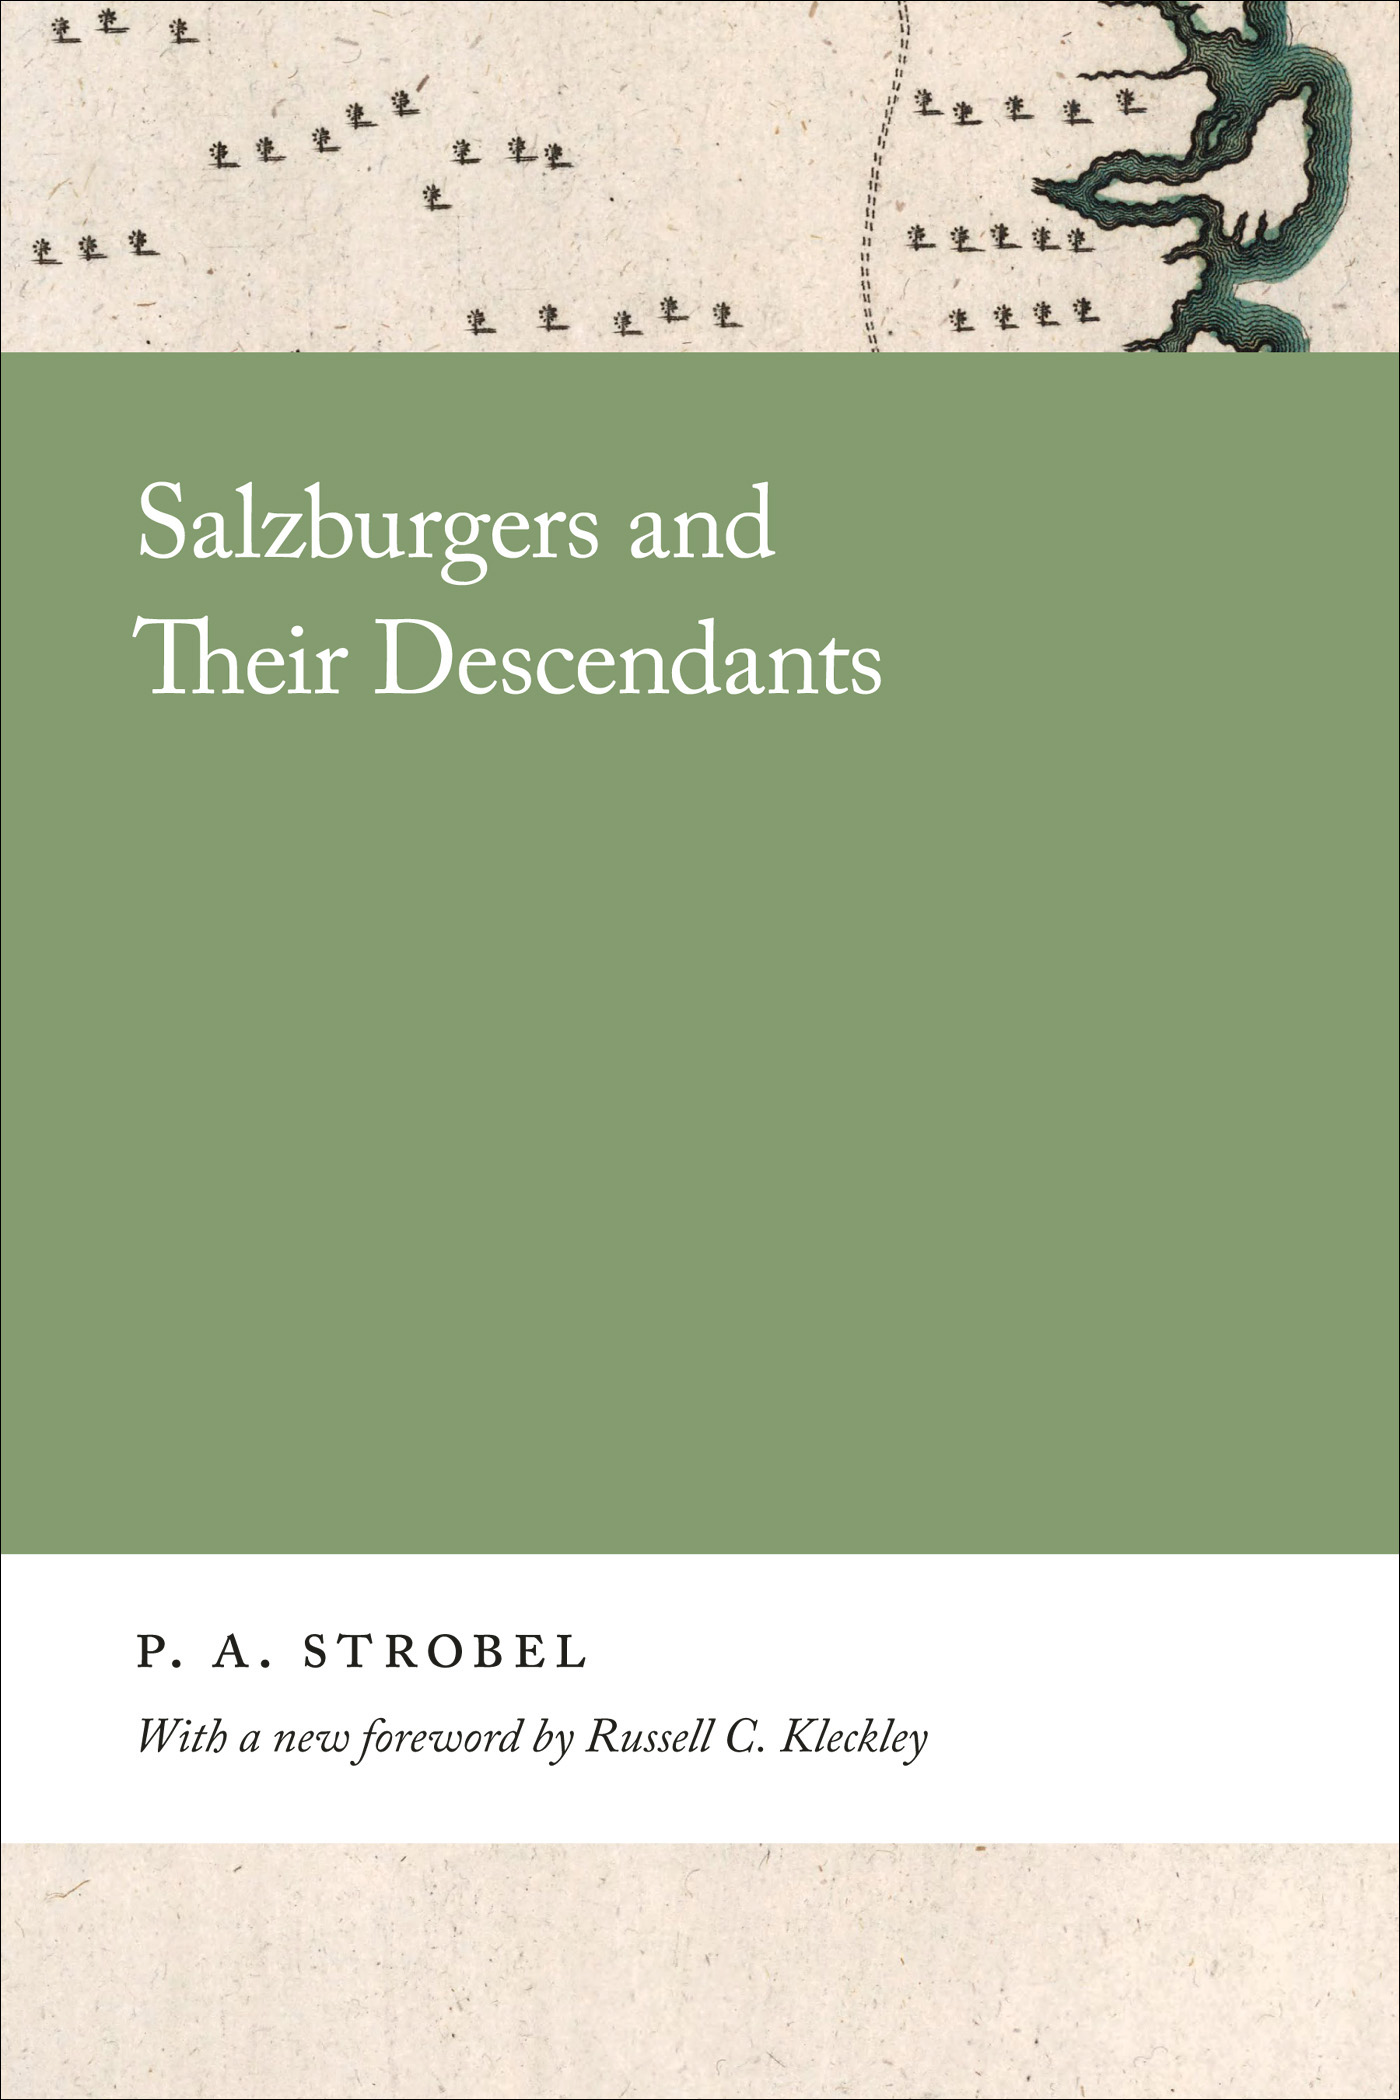 Cover page of the book “Salzburgers and Their Descendants.”